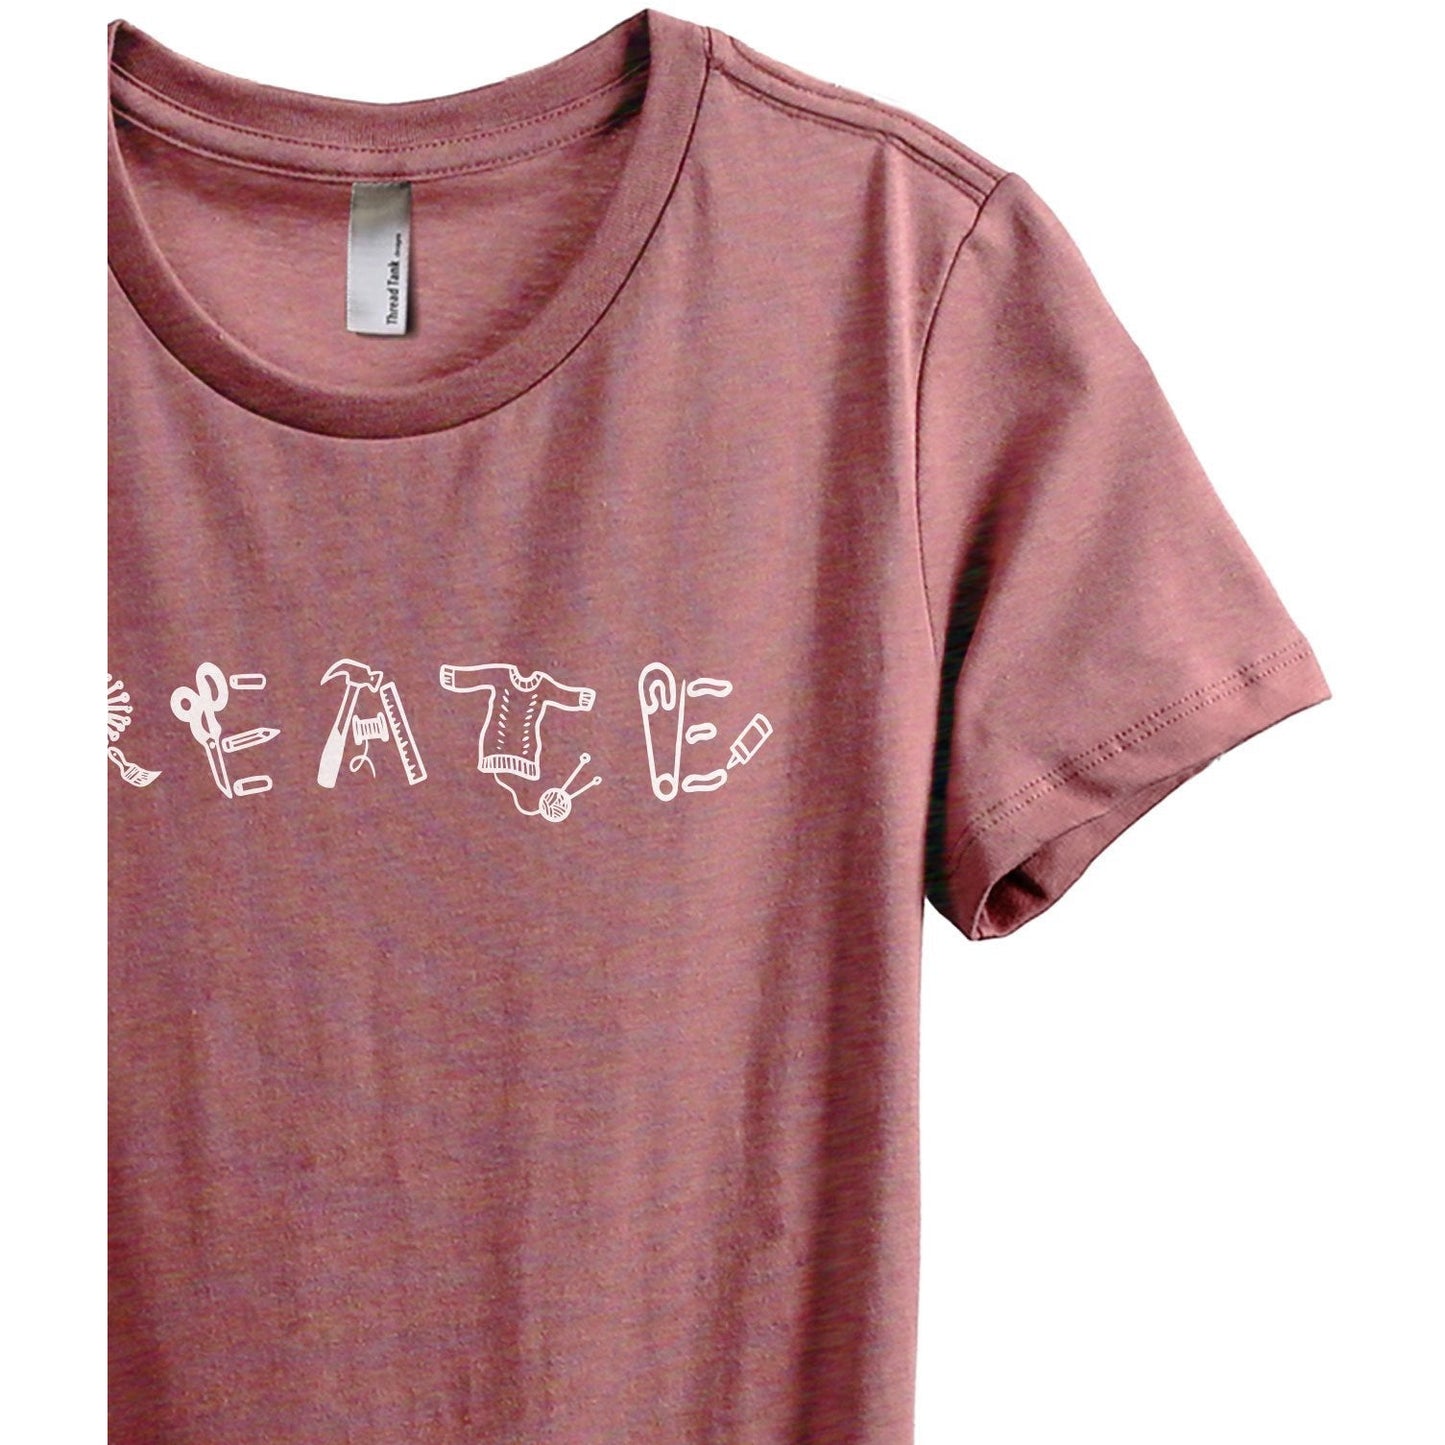 Create Women's Relaxed Crewneck T-Shirt Top Tee Heather Rouge Zoom Details
